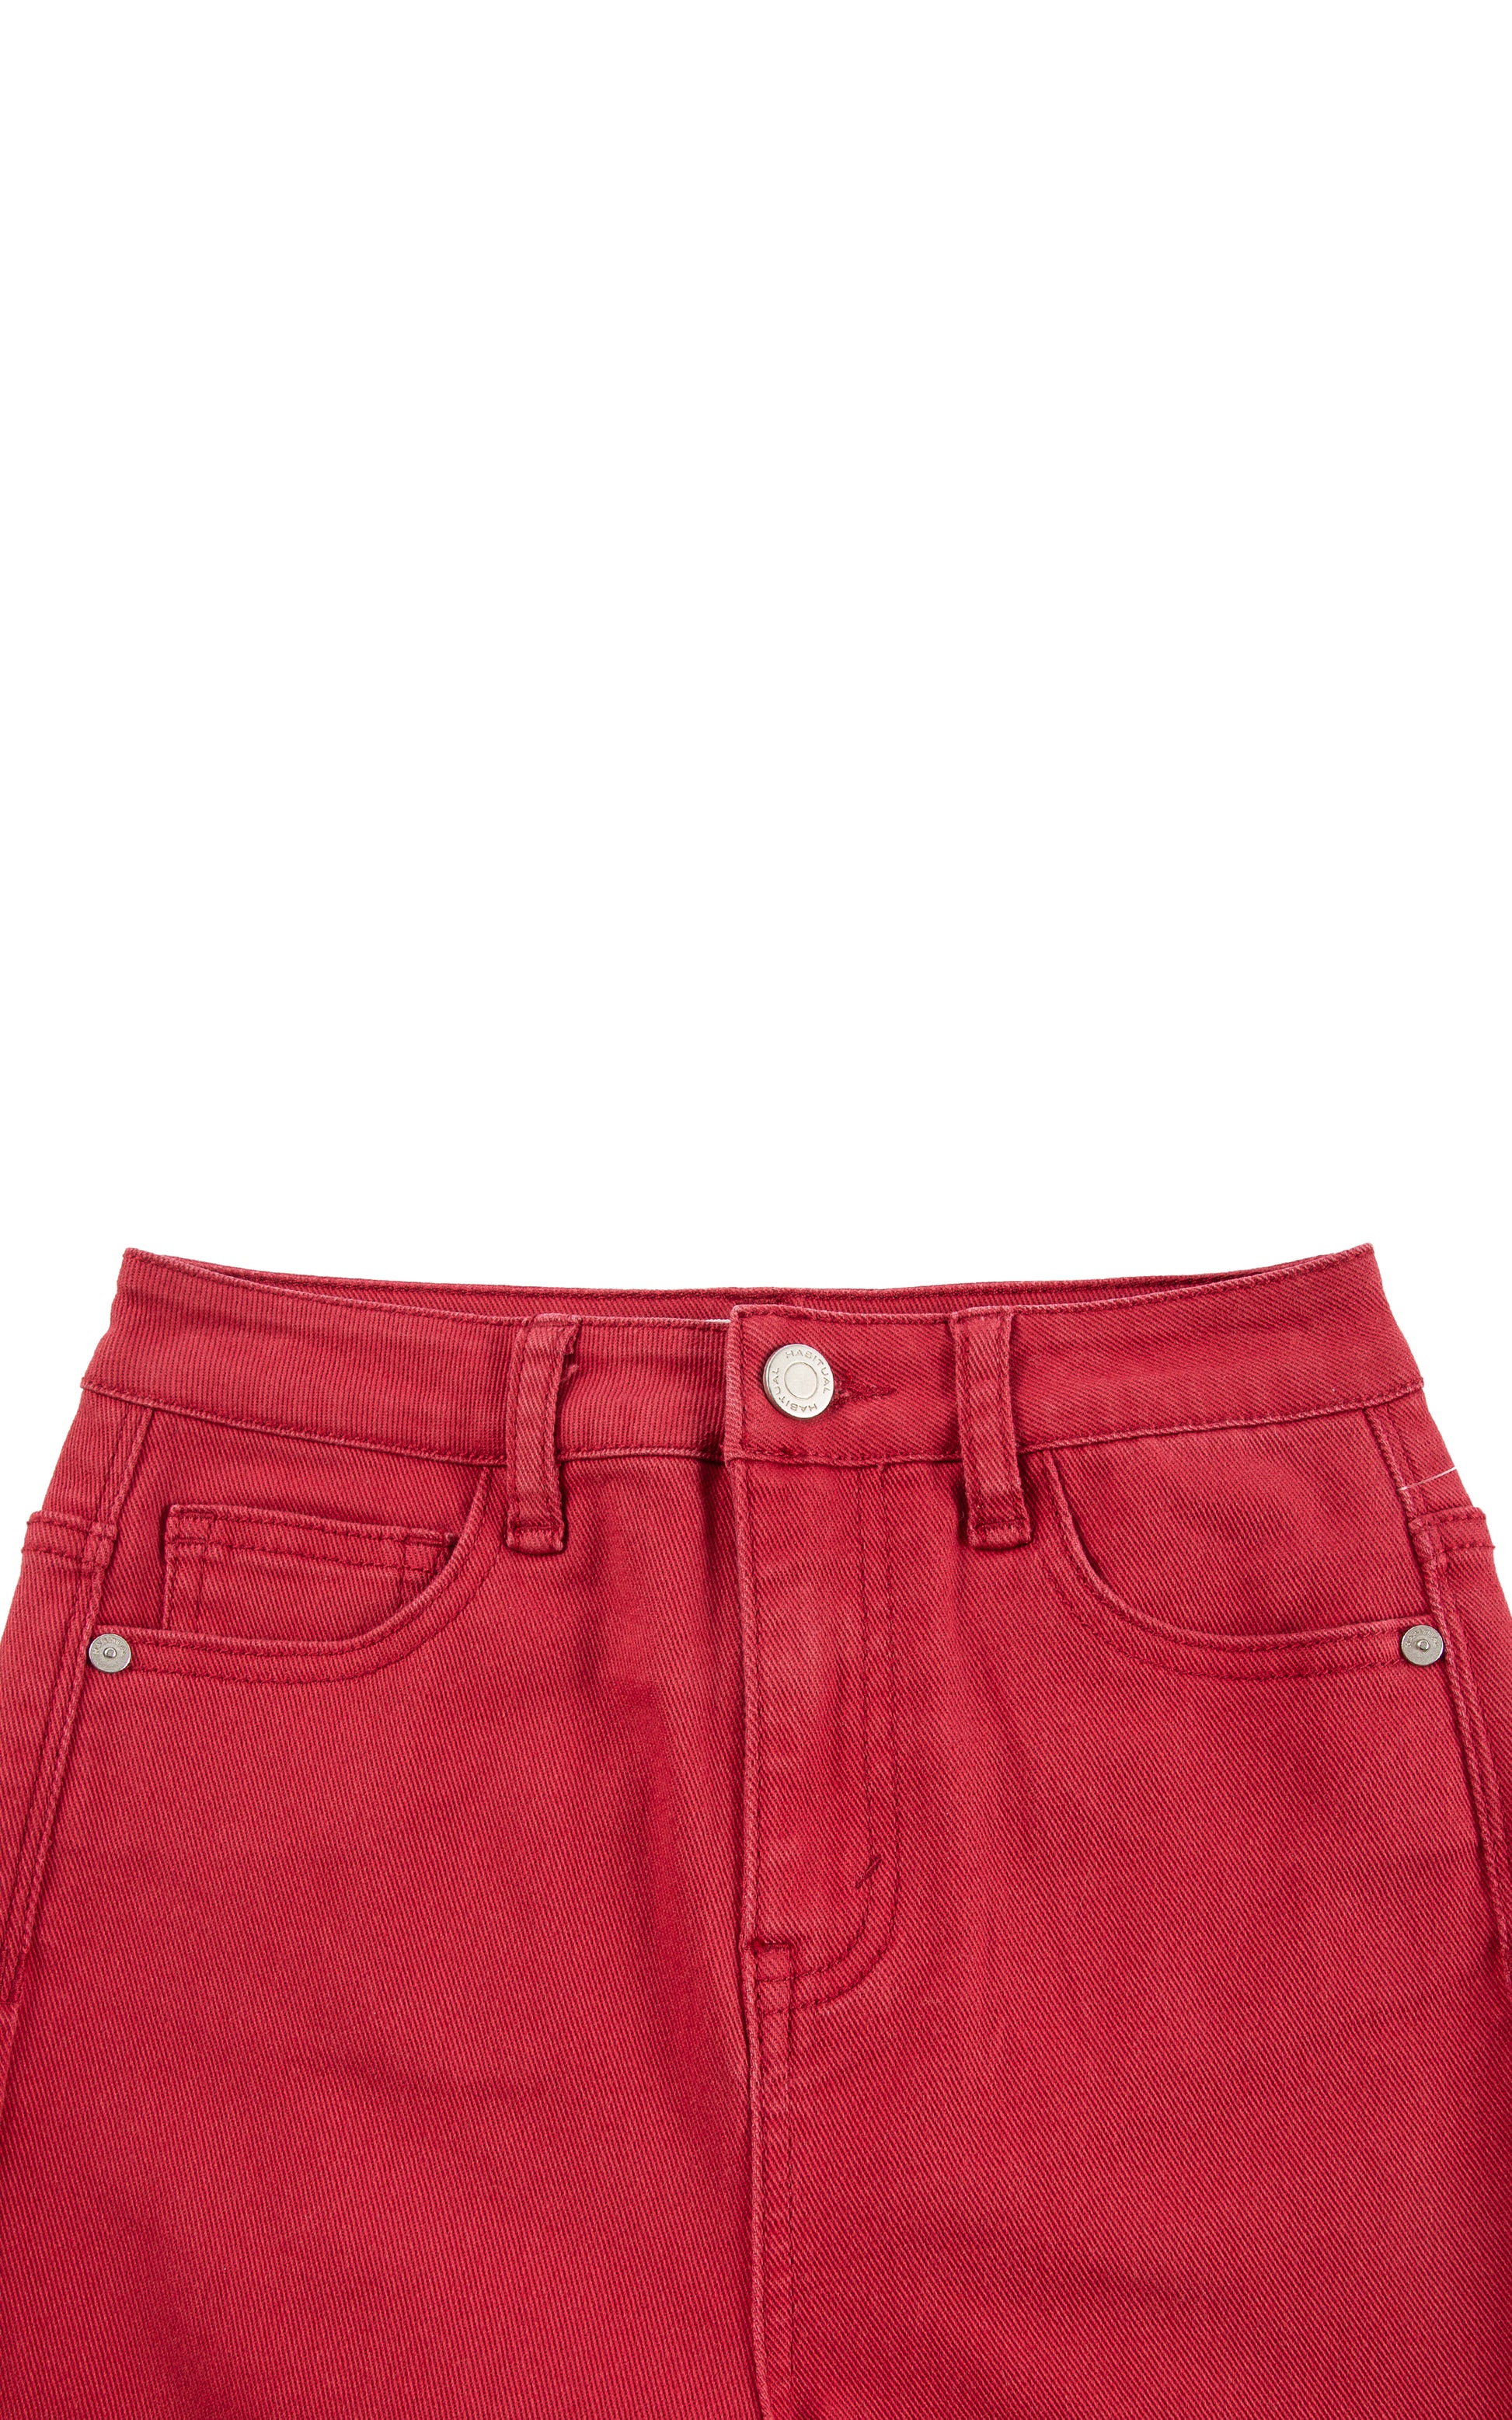 CLOSE UP OF DARK RED FLARE LEG JEANS BUTTON UP WAISTBAND